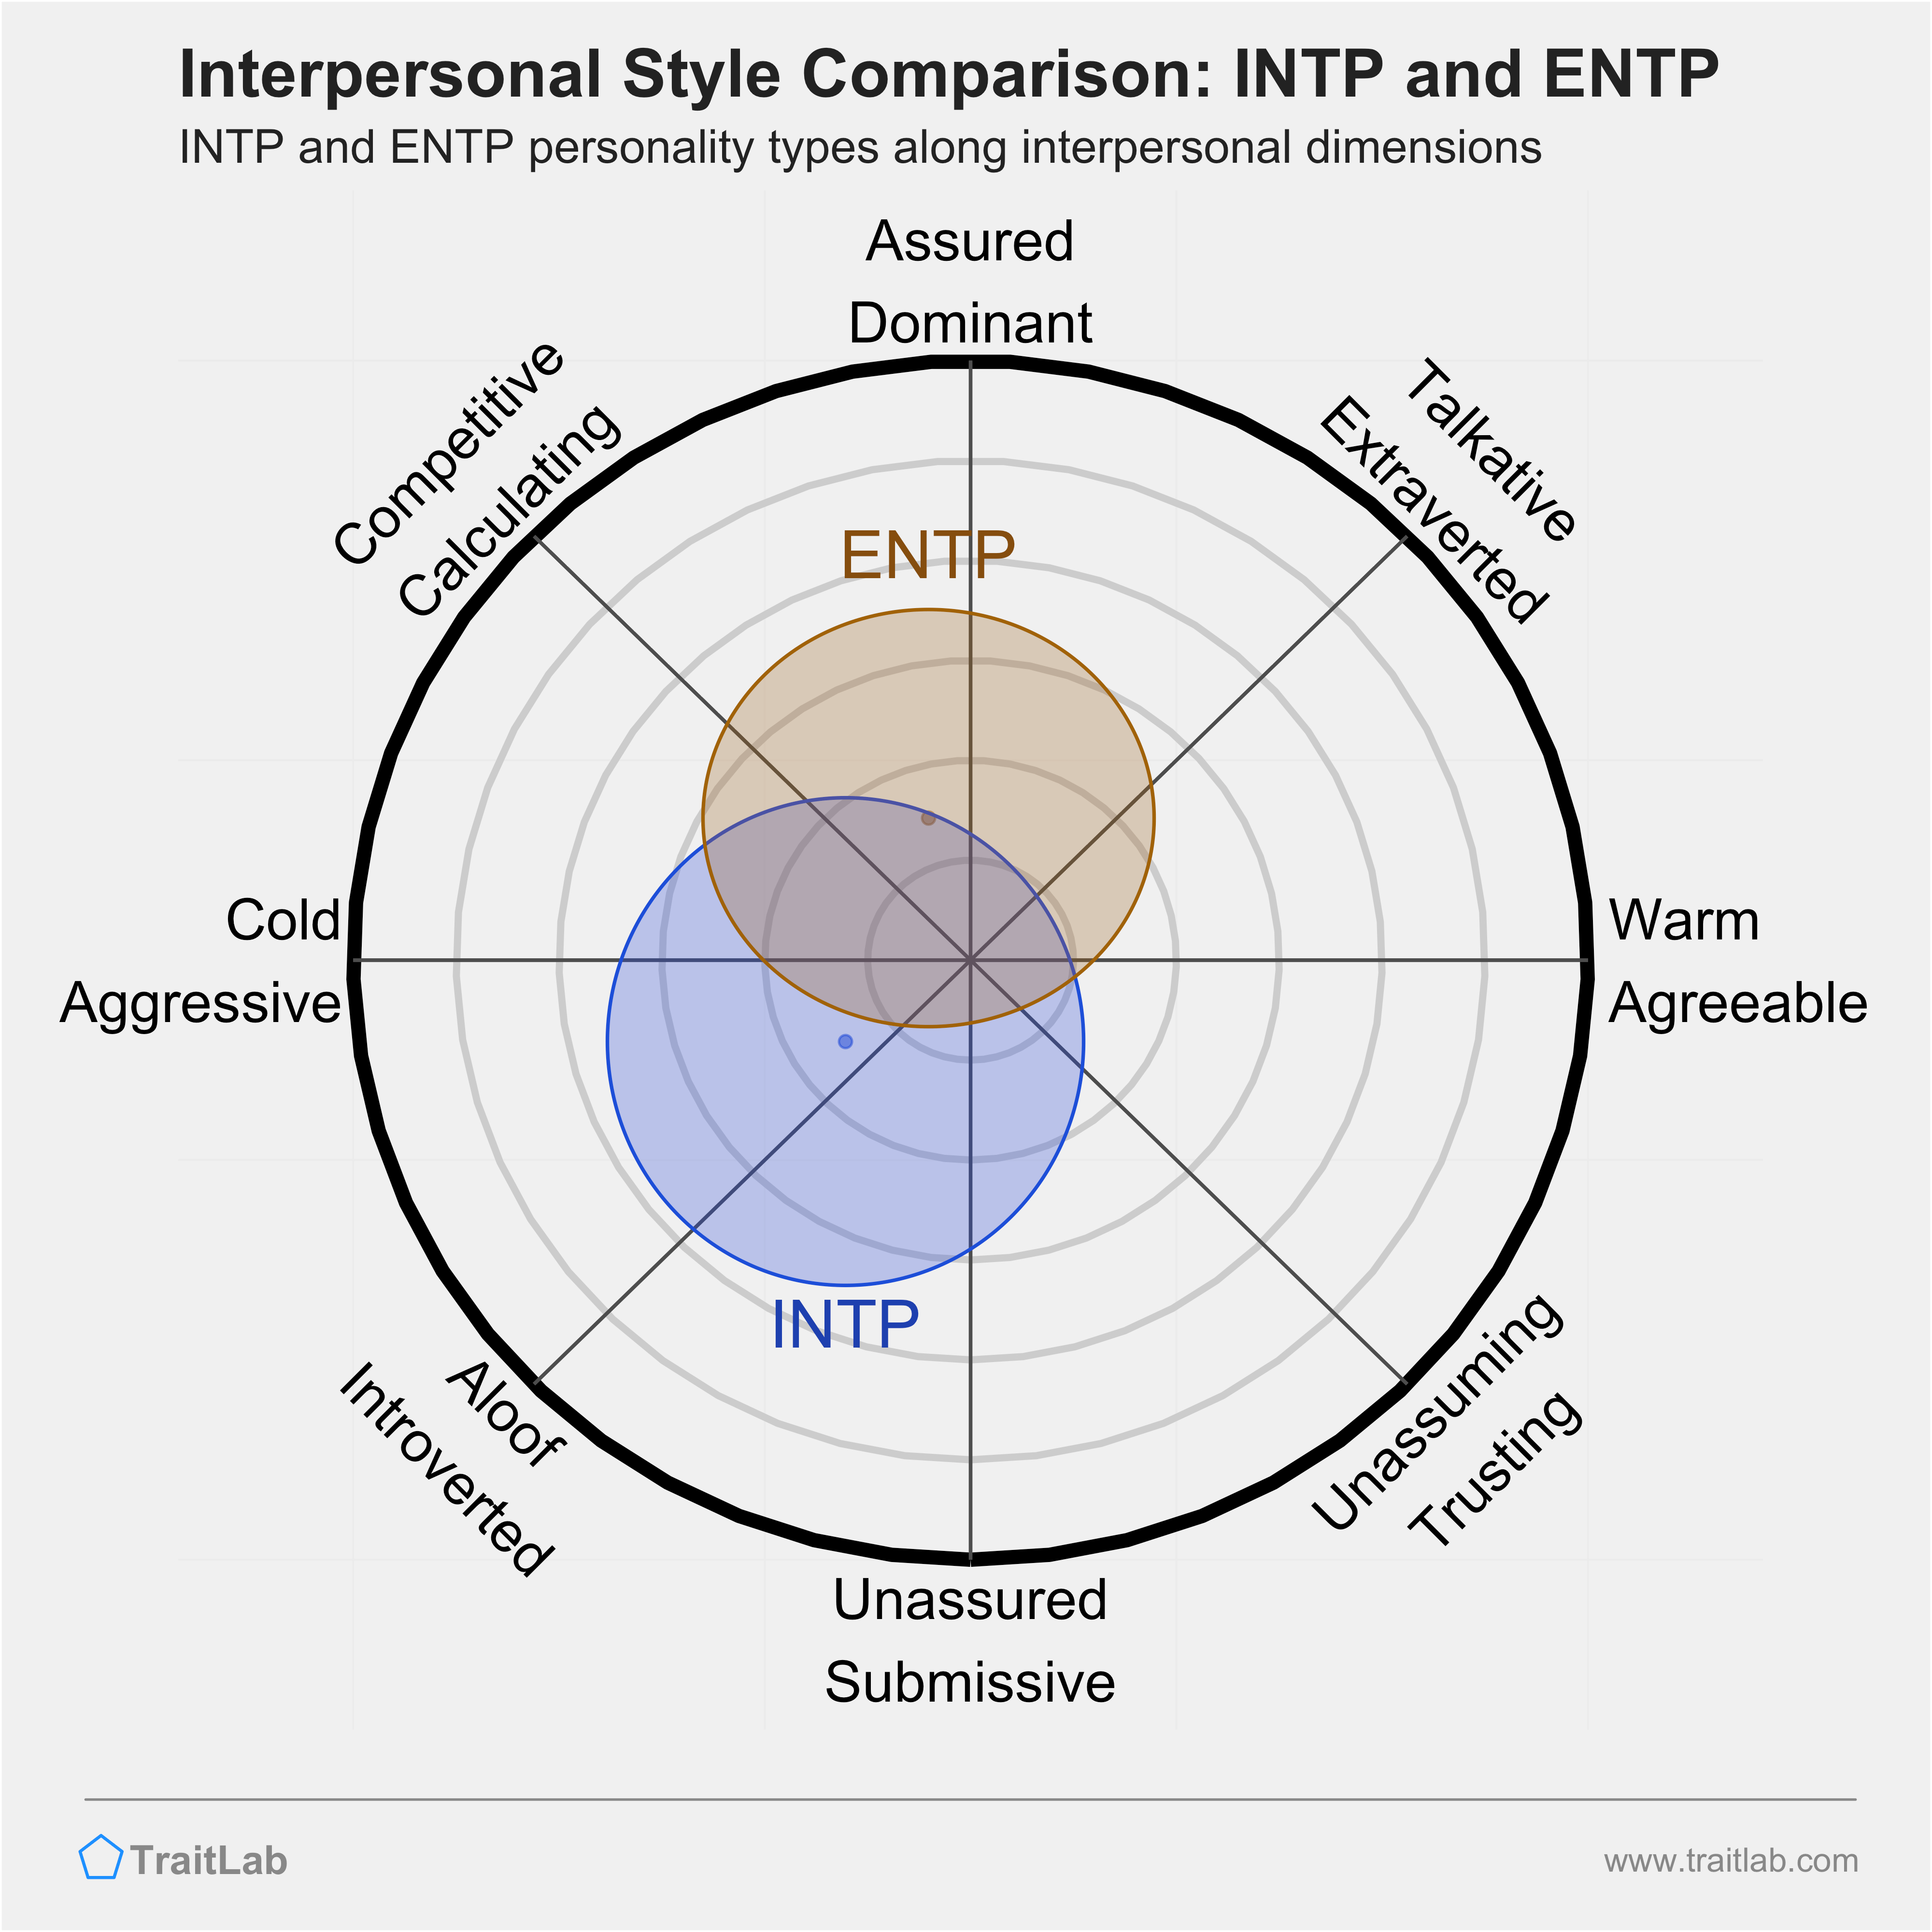 INTP and ENTP comparison across interpersonal dimensions